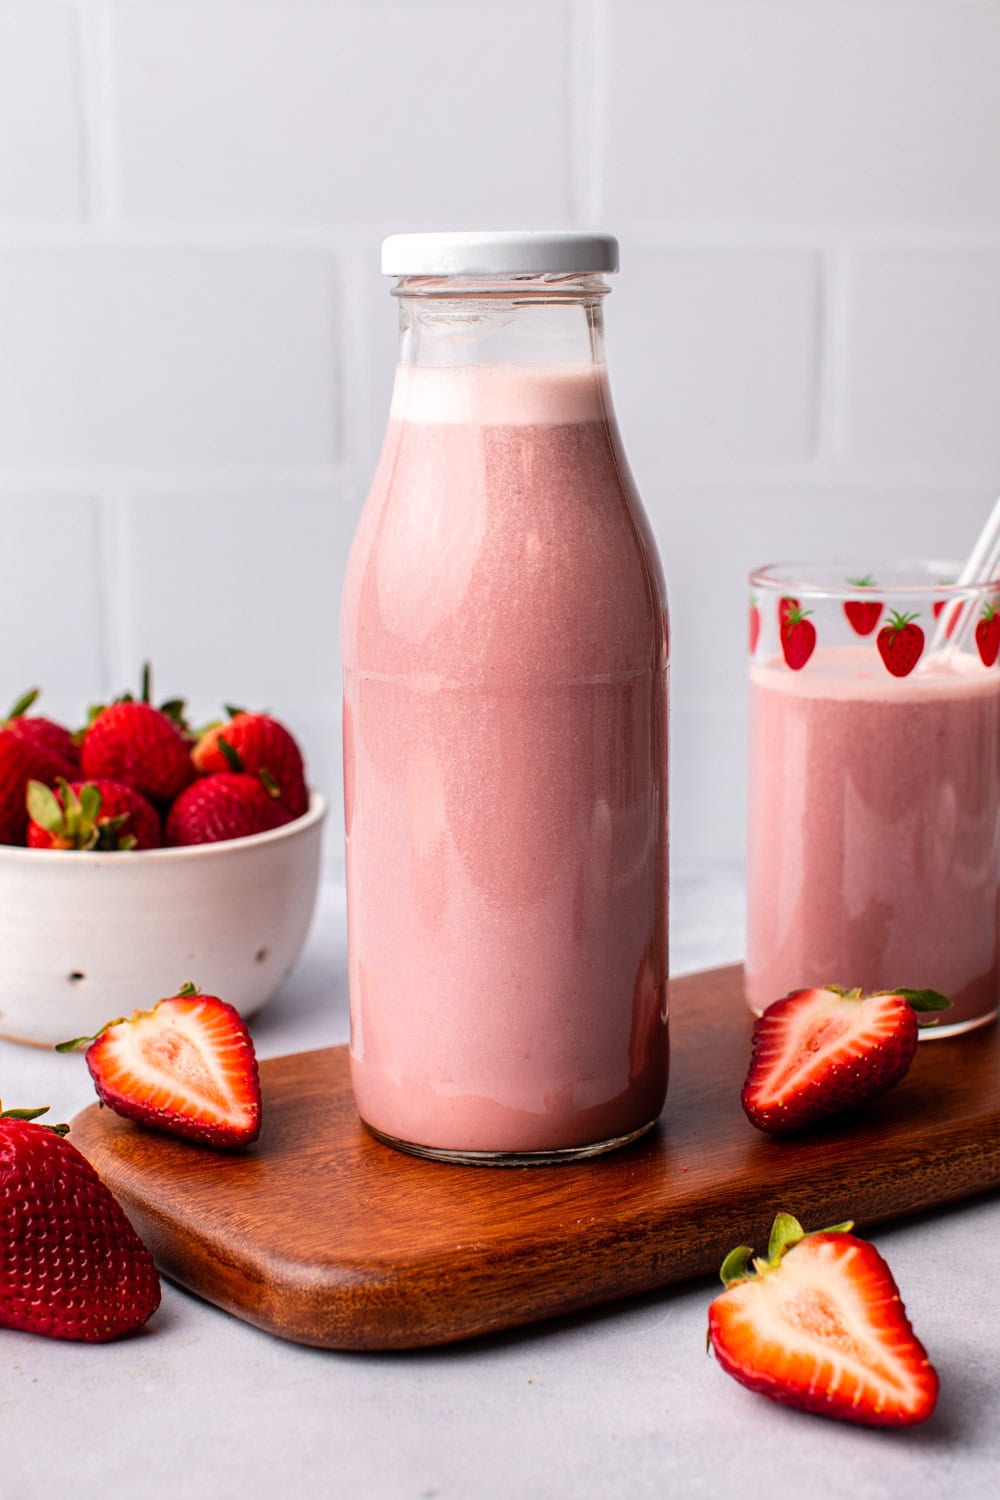 vegan strawberry milk served in a glass bottle on a cutting board surrounded by strawberry pieces